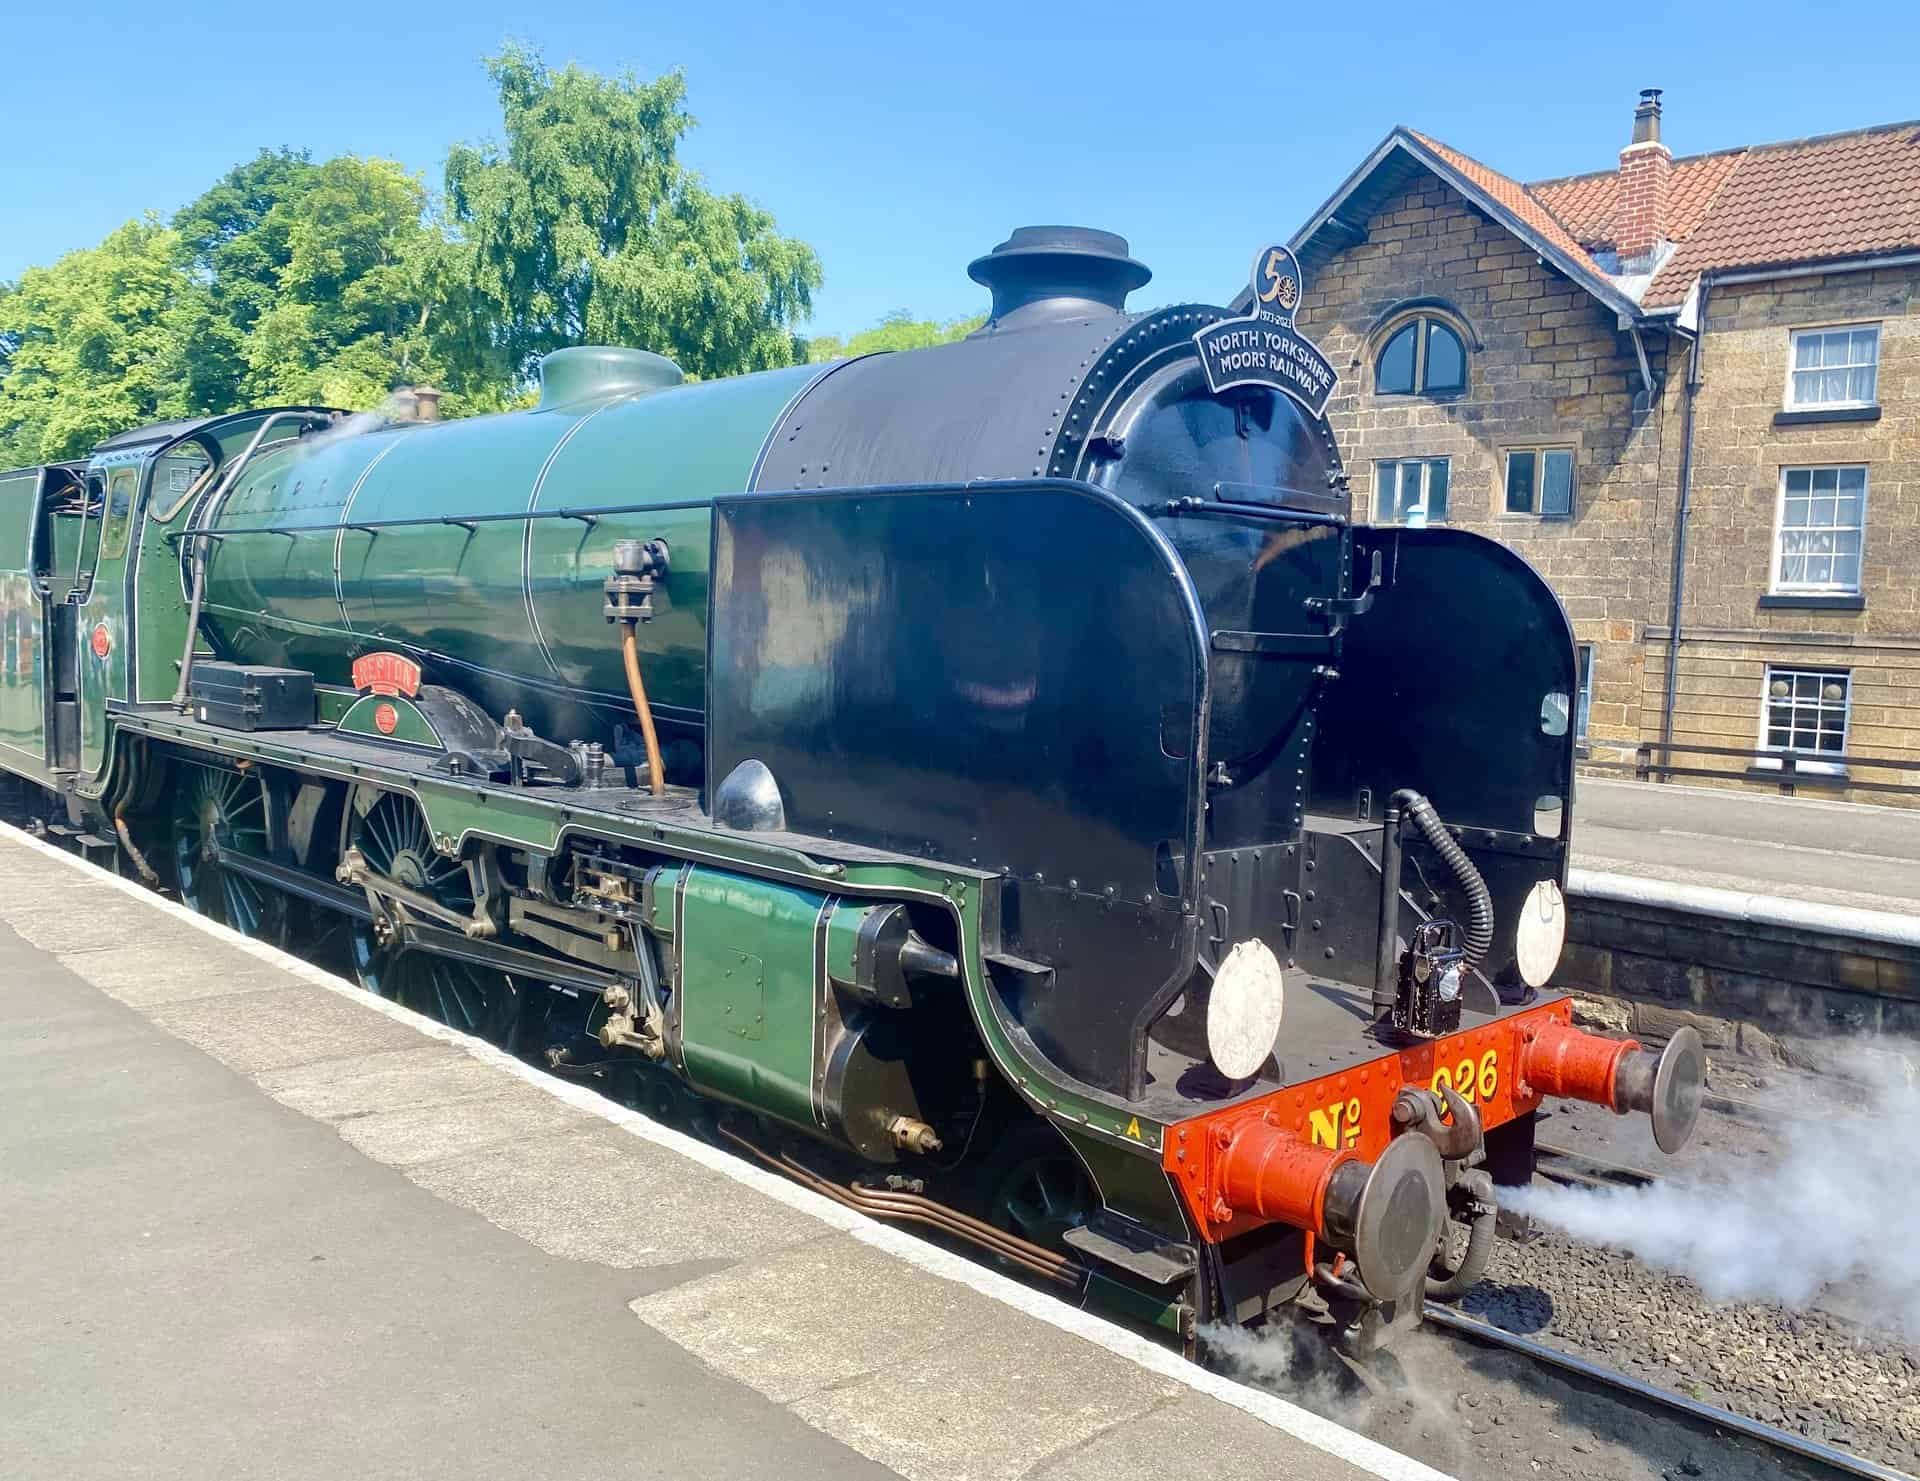 And finally, the heart of the journey, Grosmont Railway Station. An enchanting hub for the North Yorkshire Moors Railway steam trains. The shrill whistle, the puffing steam, the rhythmic chug; it's a sight to behold and a sound to savour. The station teems with life, yet exudes a profound serenity.